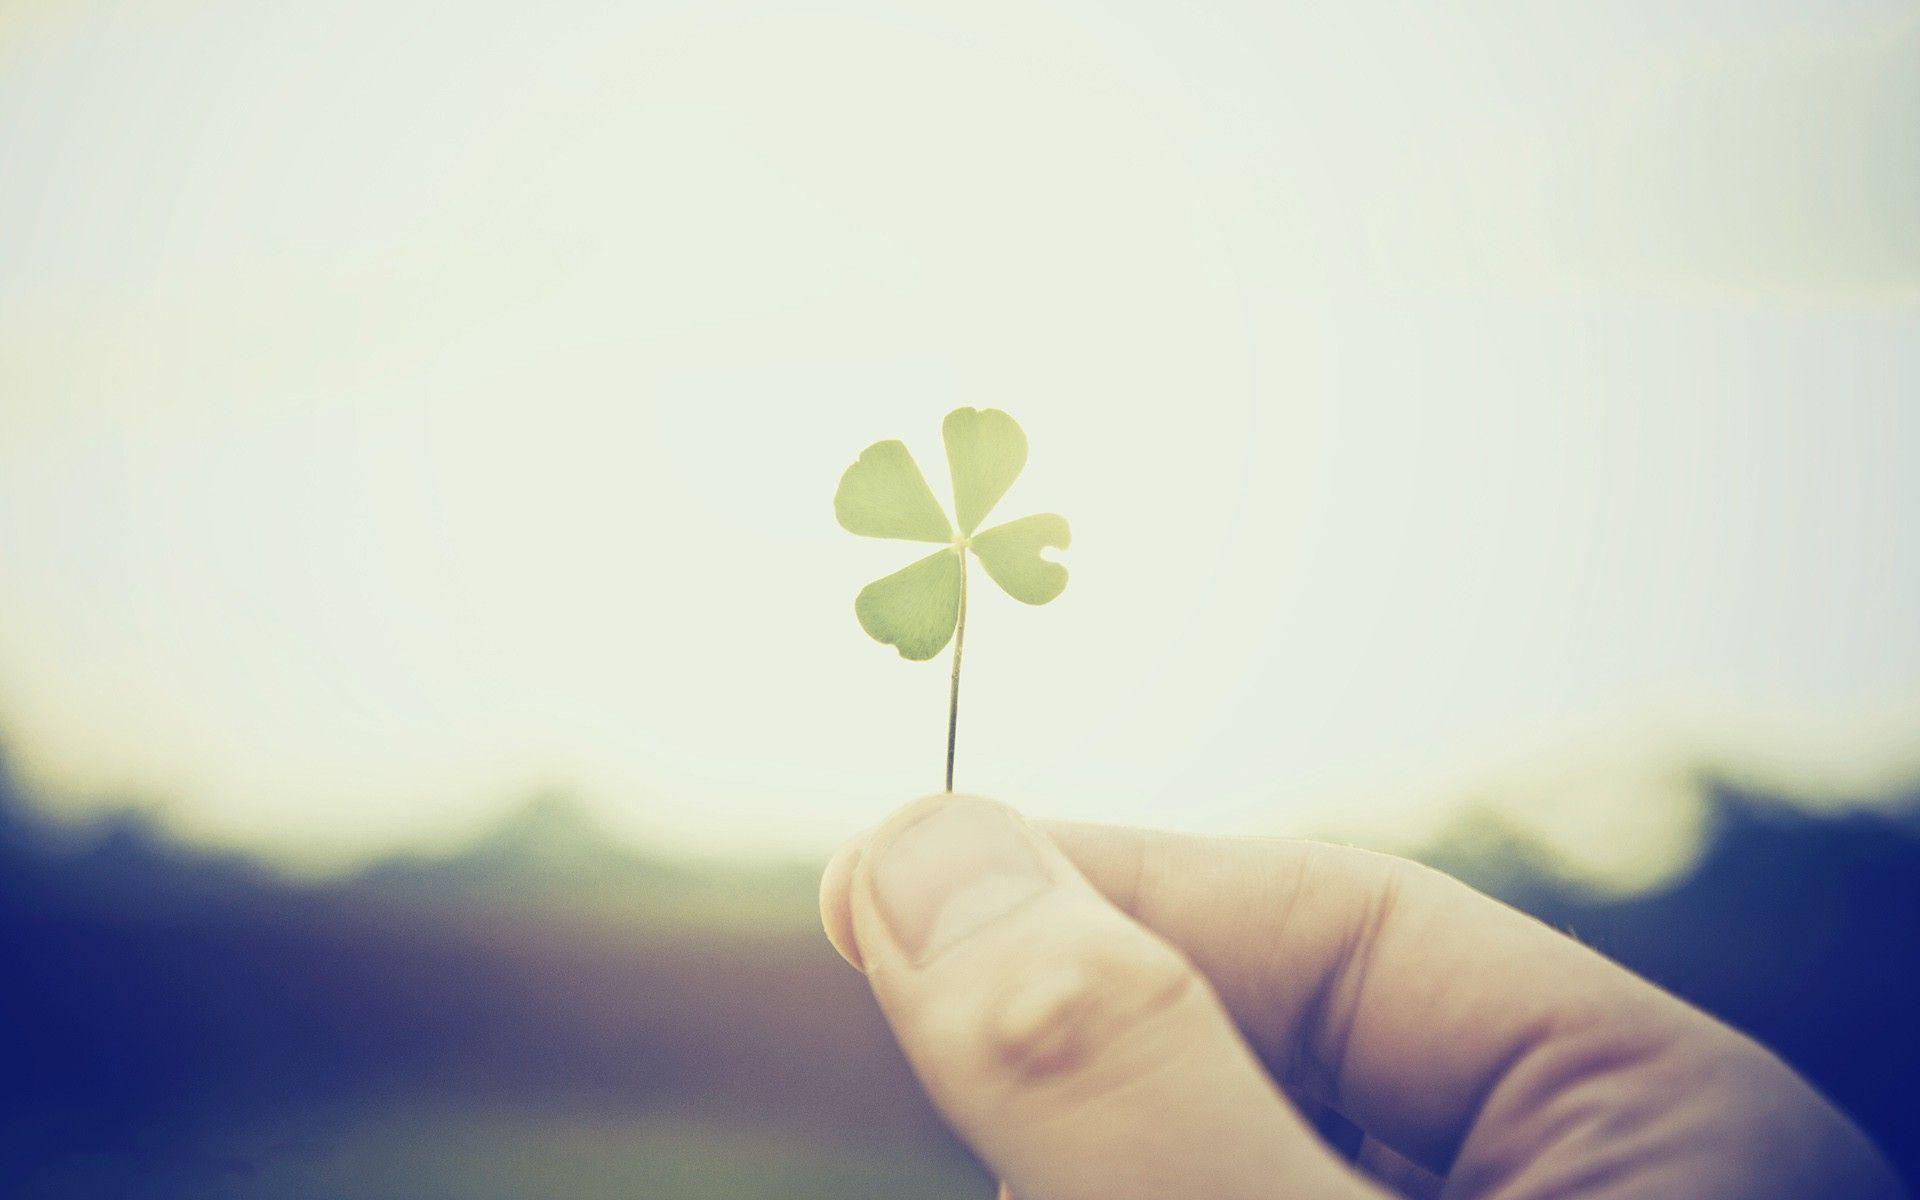 Wallpaper.wiki Four Leaf Clover Wallpaper Free Download PIC